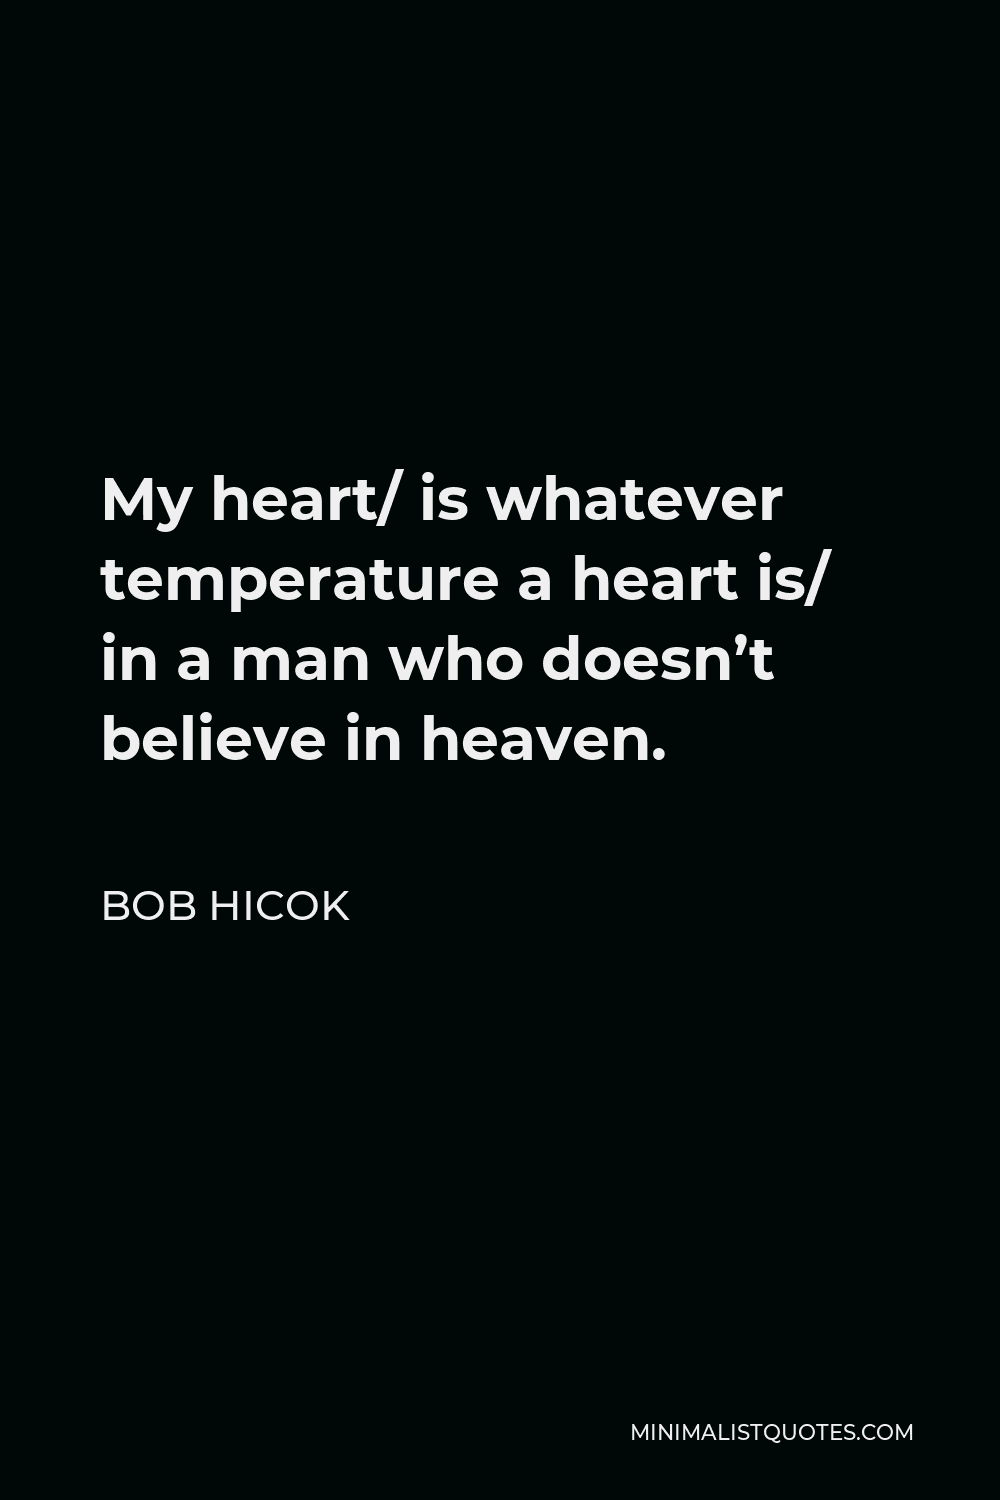 Bob Hicok Quote - My heart/ is whatever temperature a heart is/ in a man who doesn’t believe in heaven.